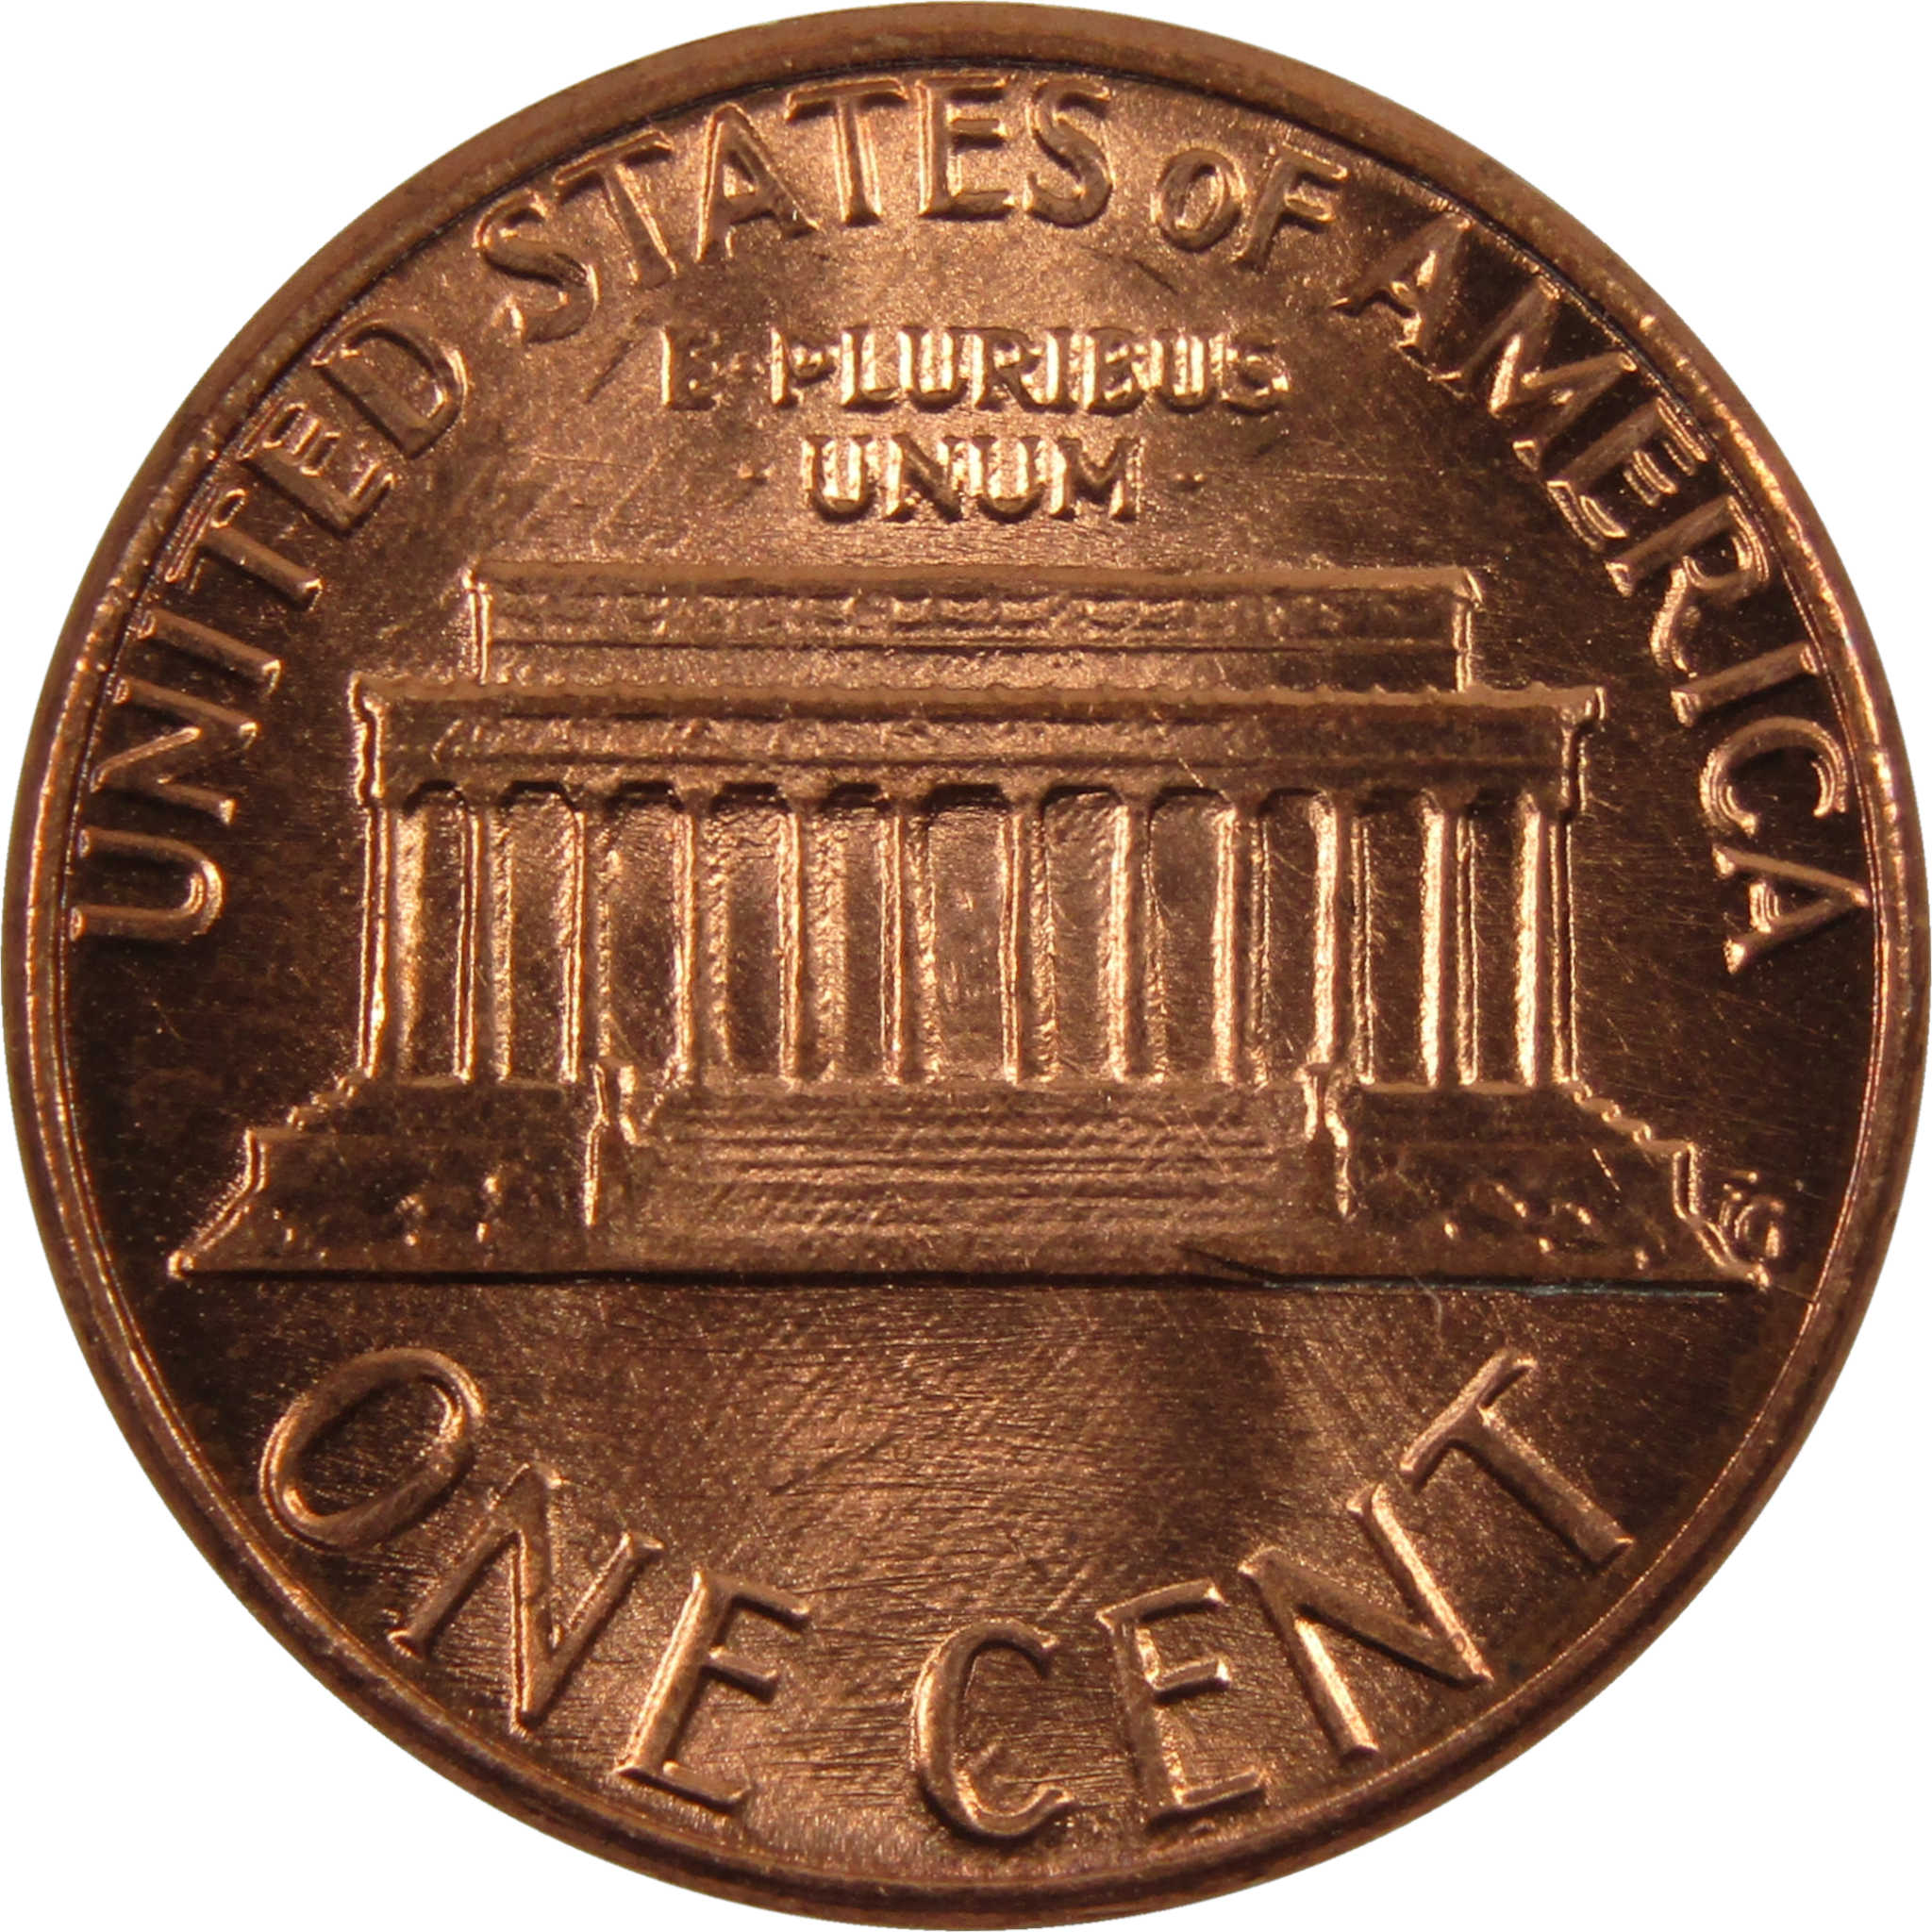 1983 Lincoln Memorial Cent BU Uncirculated Penny 1c Coin